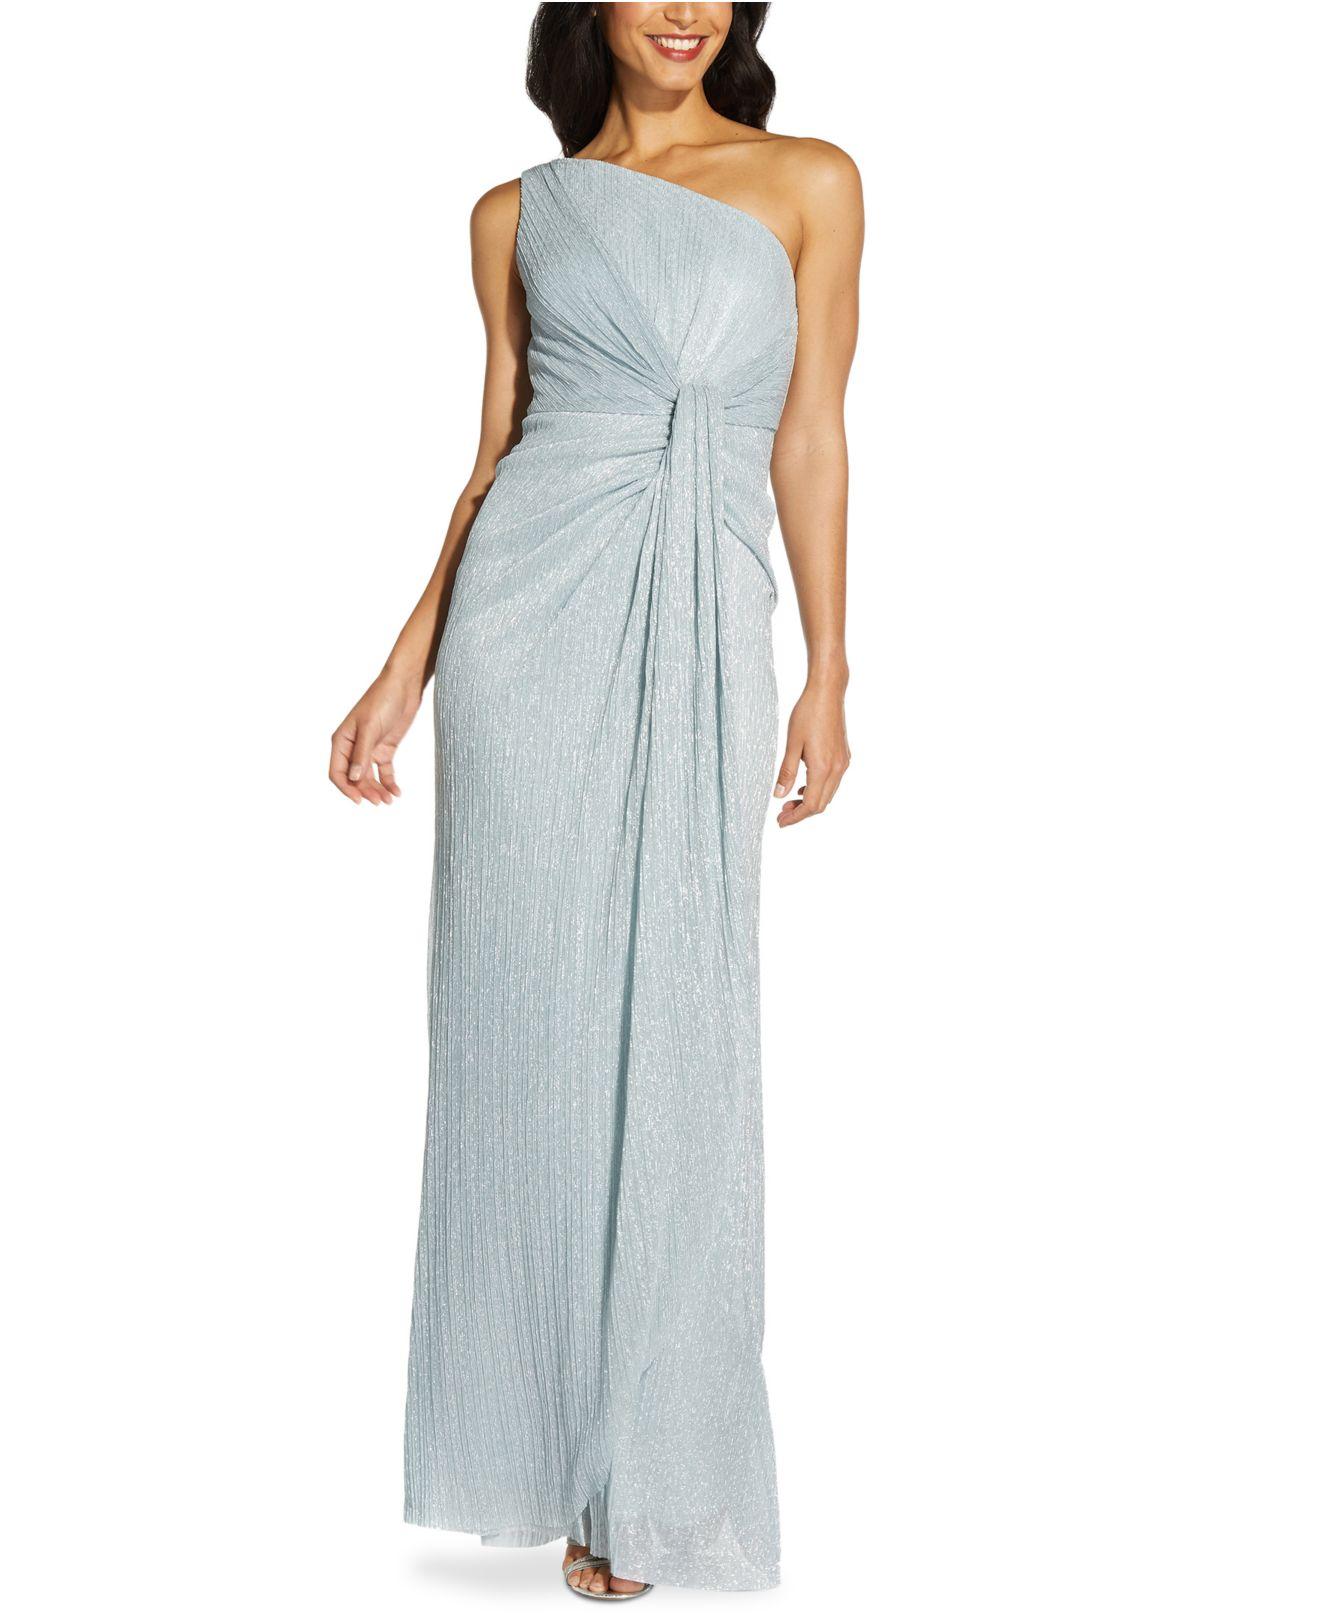 Adrianna Papell Synthetic Petite Stardust One-shoulder Gown in Periwinkle  Blue (Blue) - Lyst